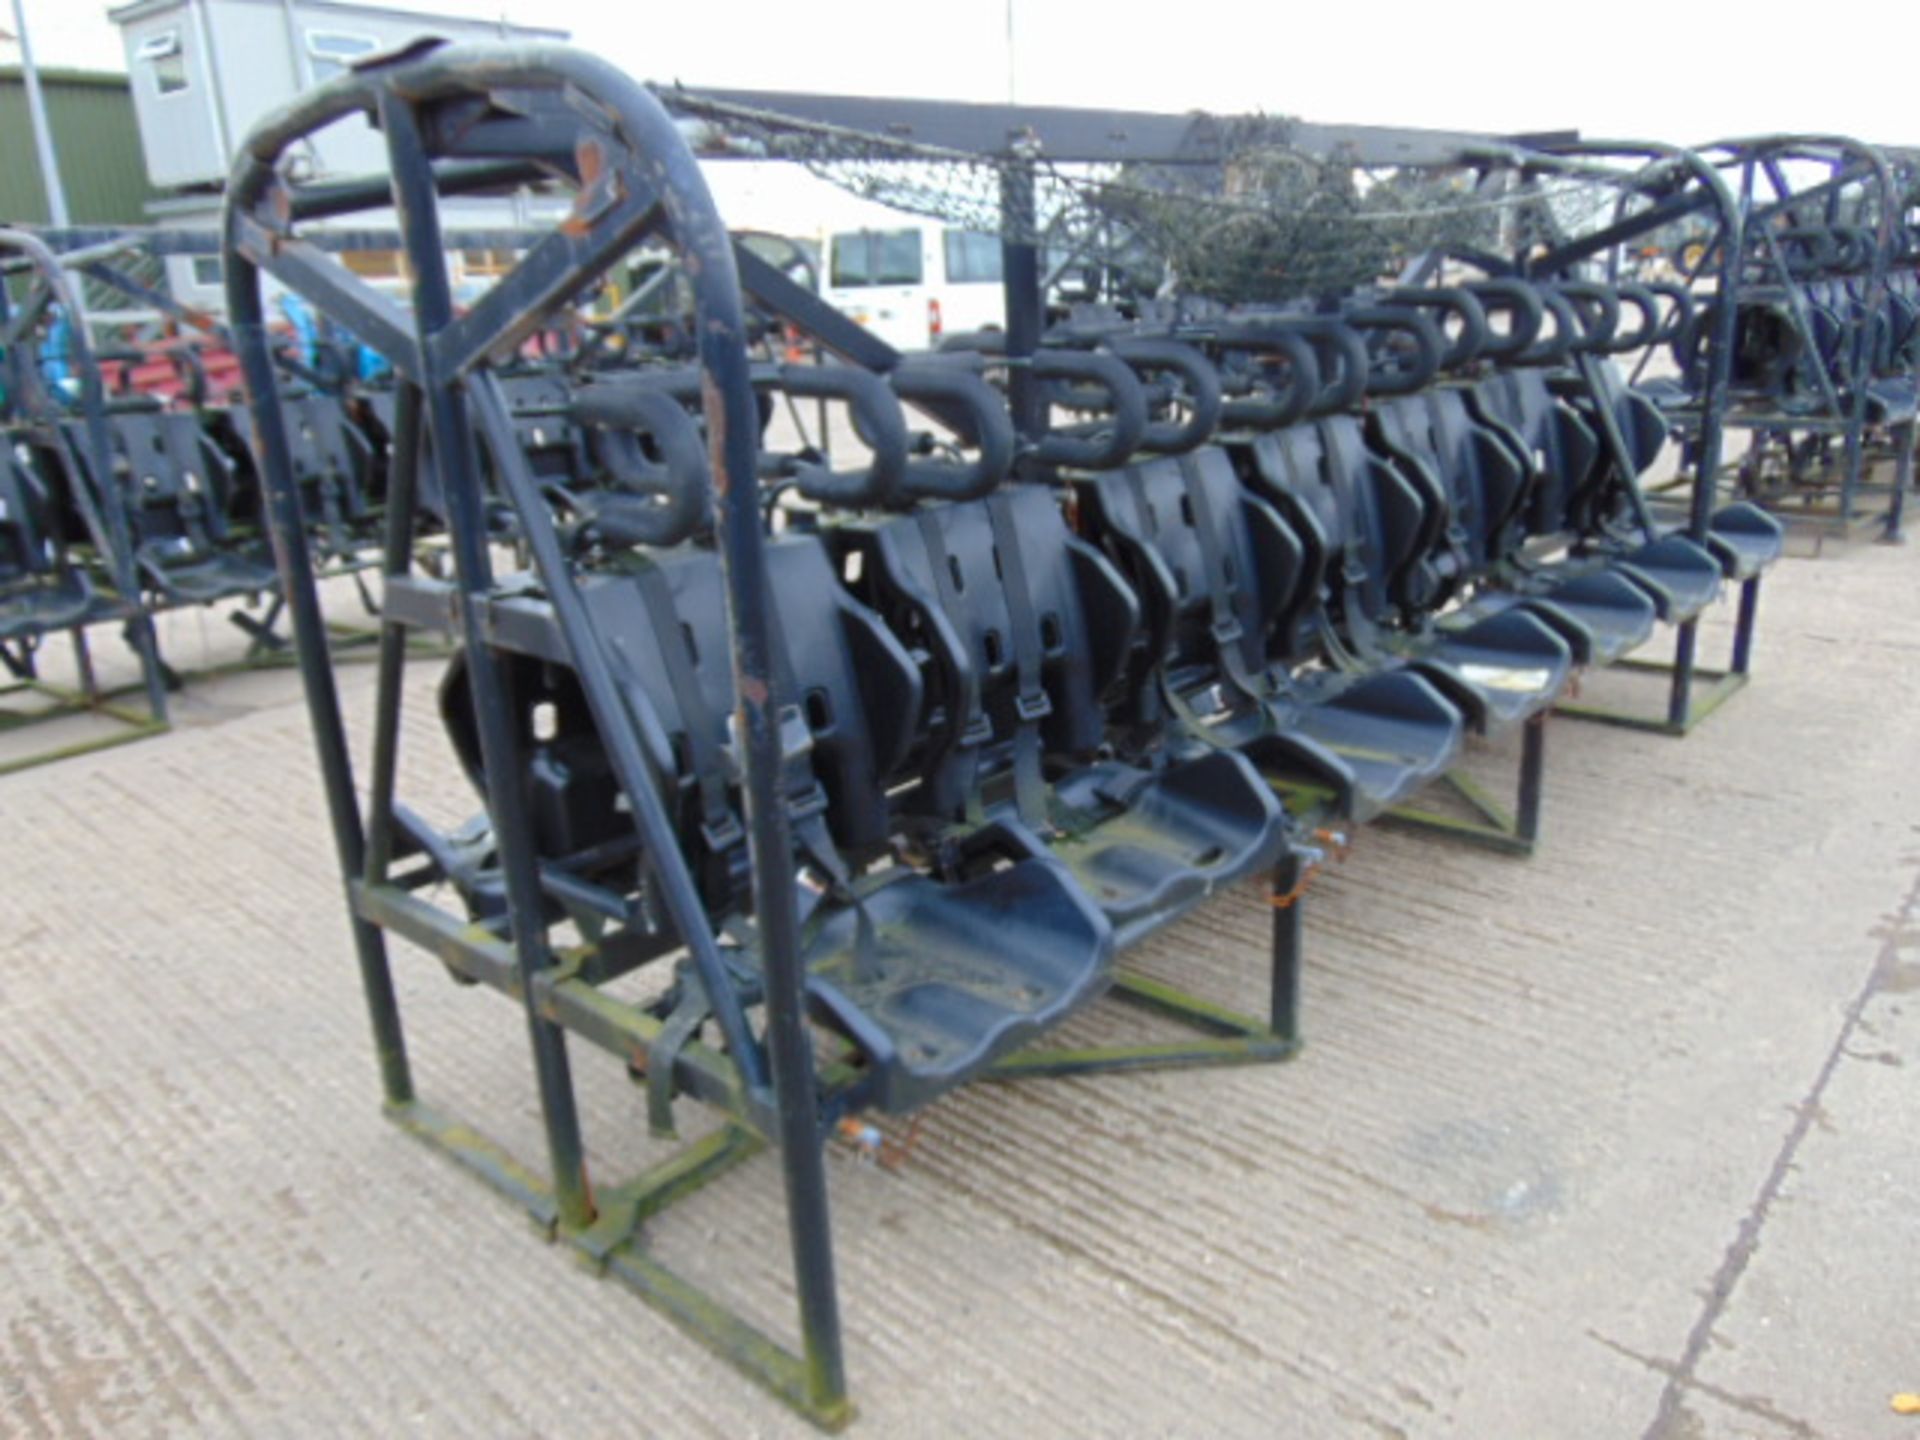 14 Man ROPS Security Seat suitable for Leyland Dafs, Bedfords etc - Image 4 of 5